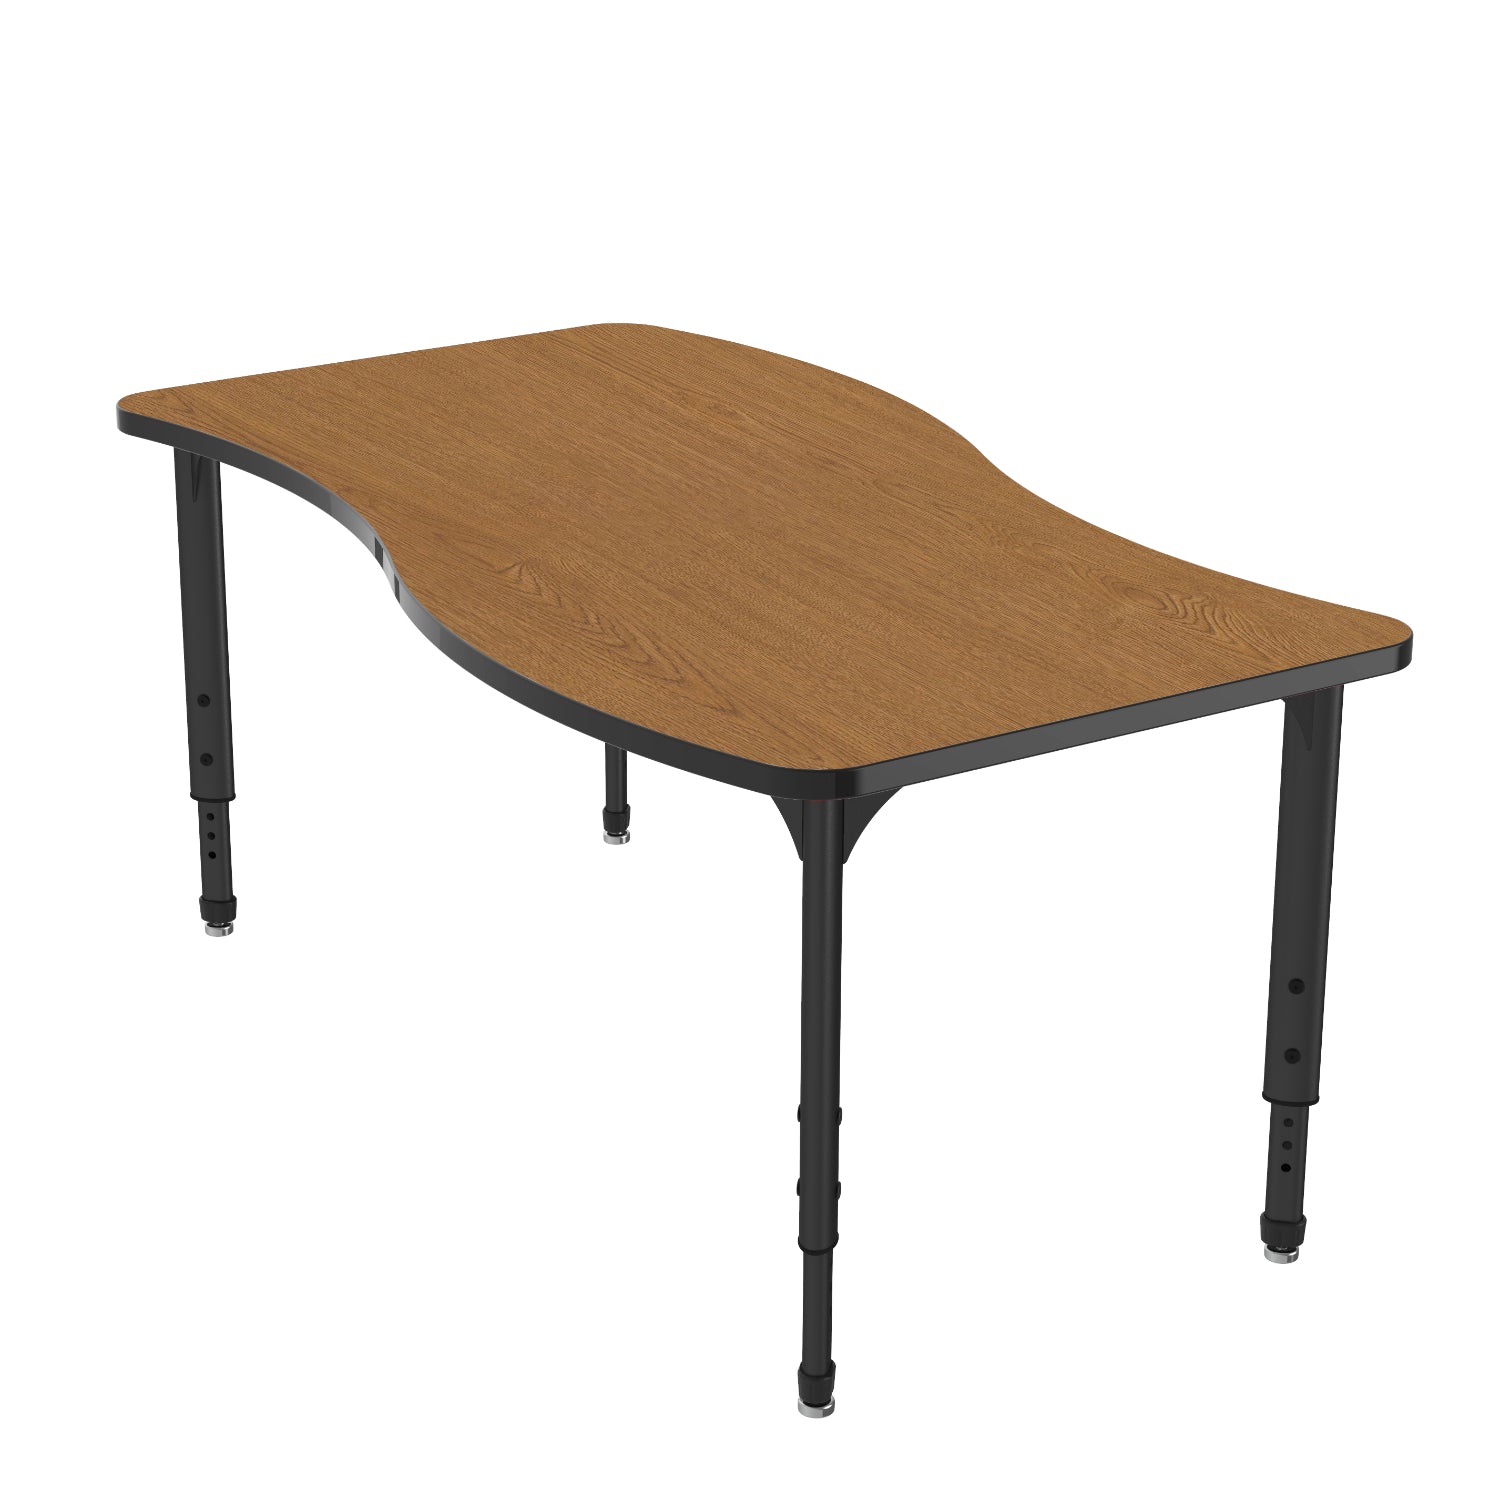 Apex Adjustable Height Collaborative Student Table, 30" x 60" Wave